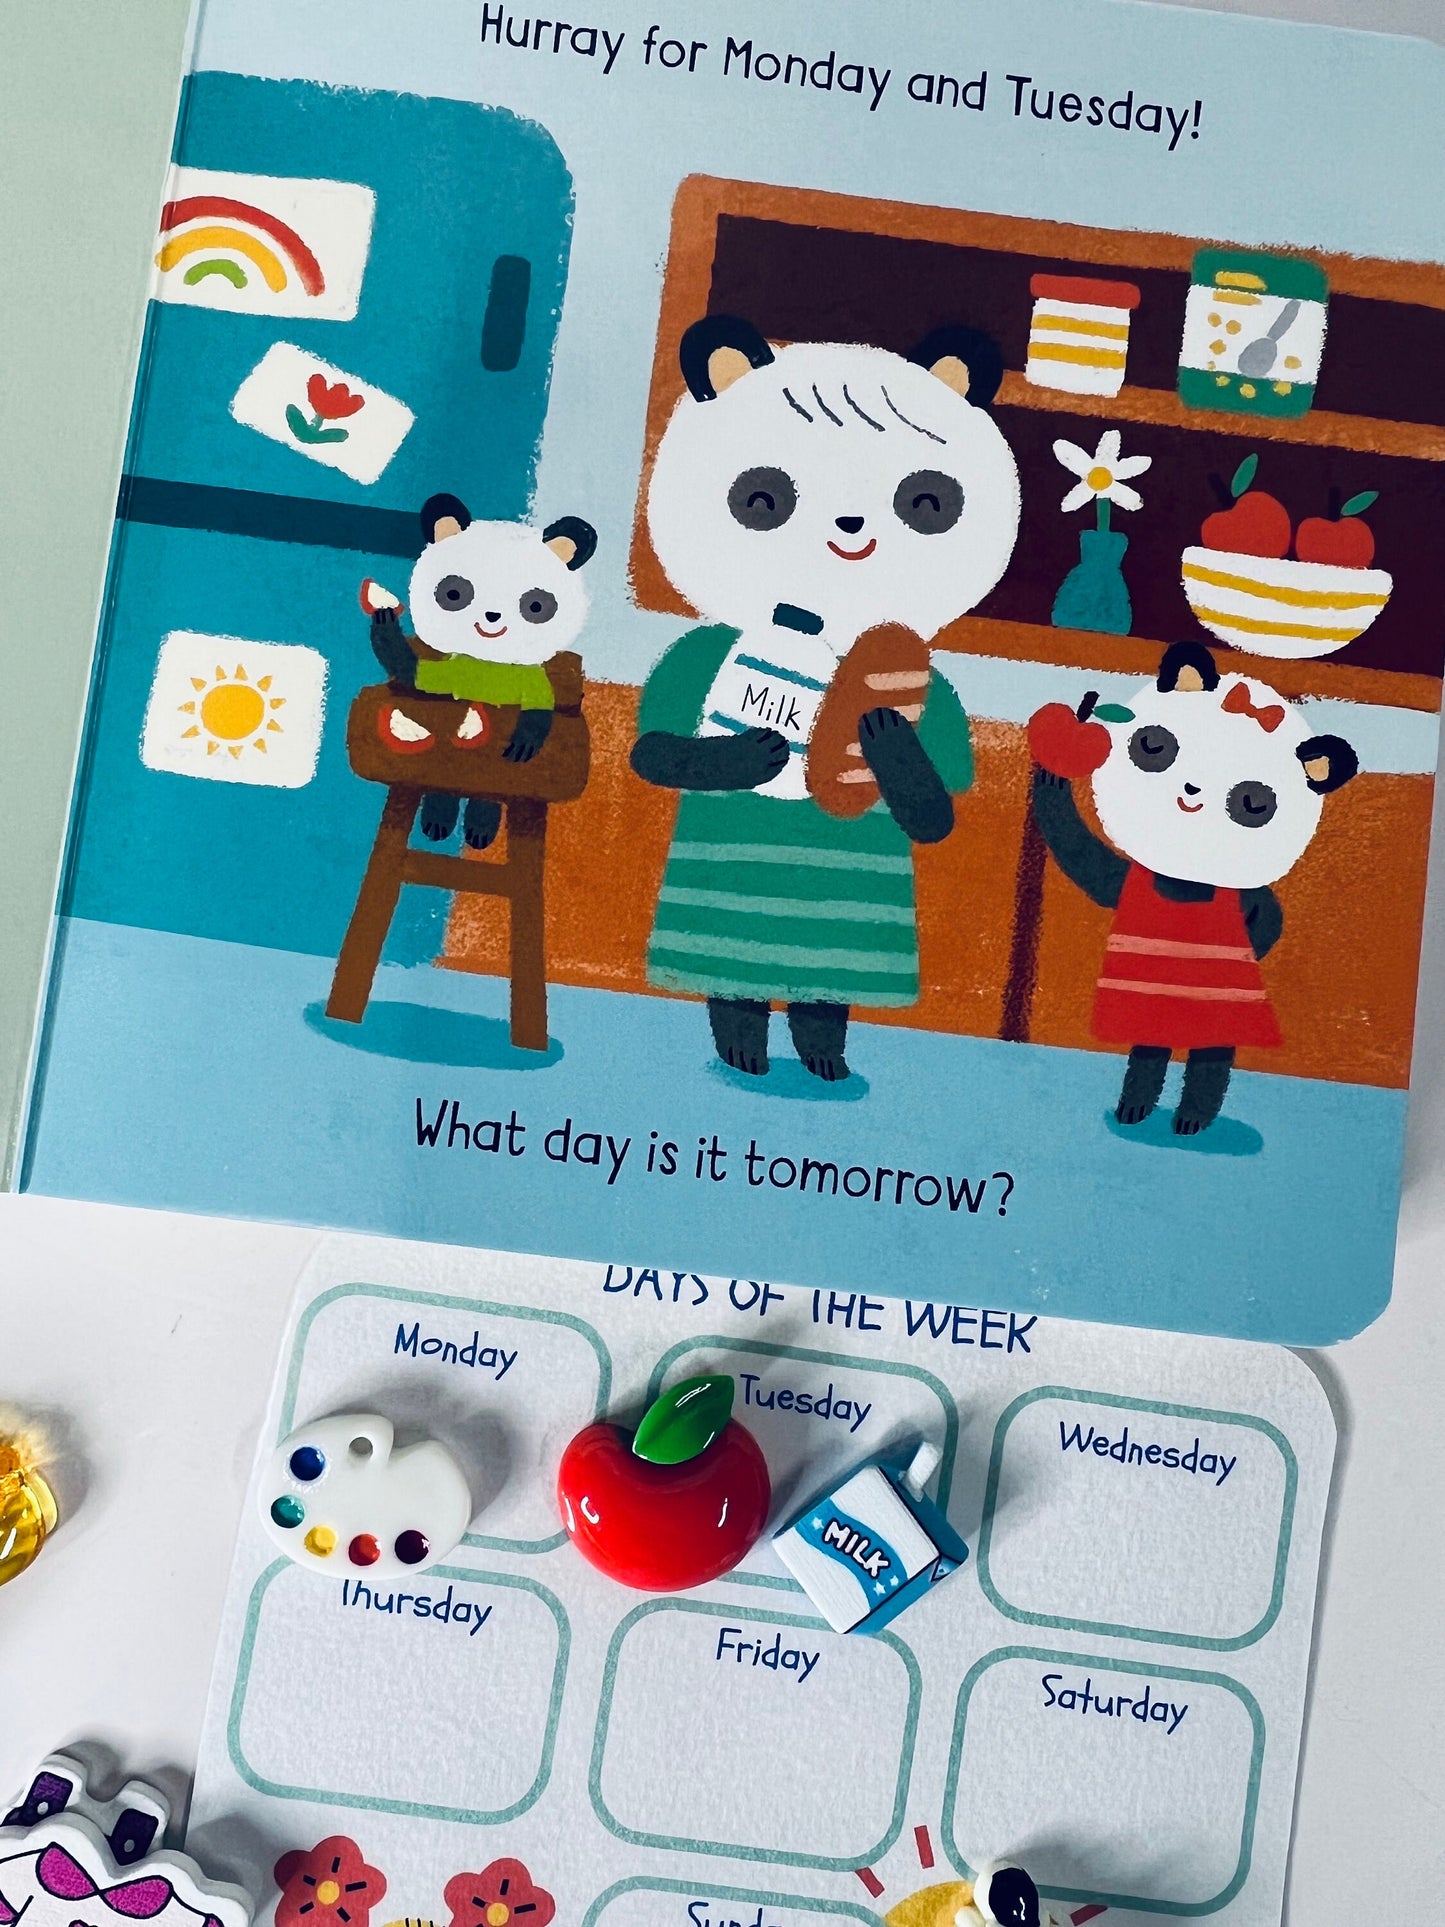 Story Kit-Days of the Week Book-Mini Objects for Books-Speech Therapy Activity-Trinkets-Doodads